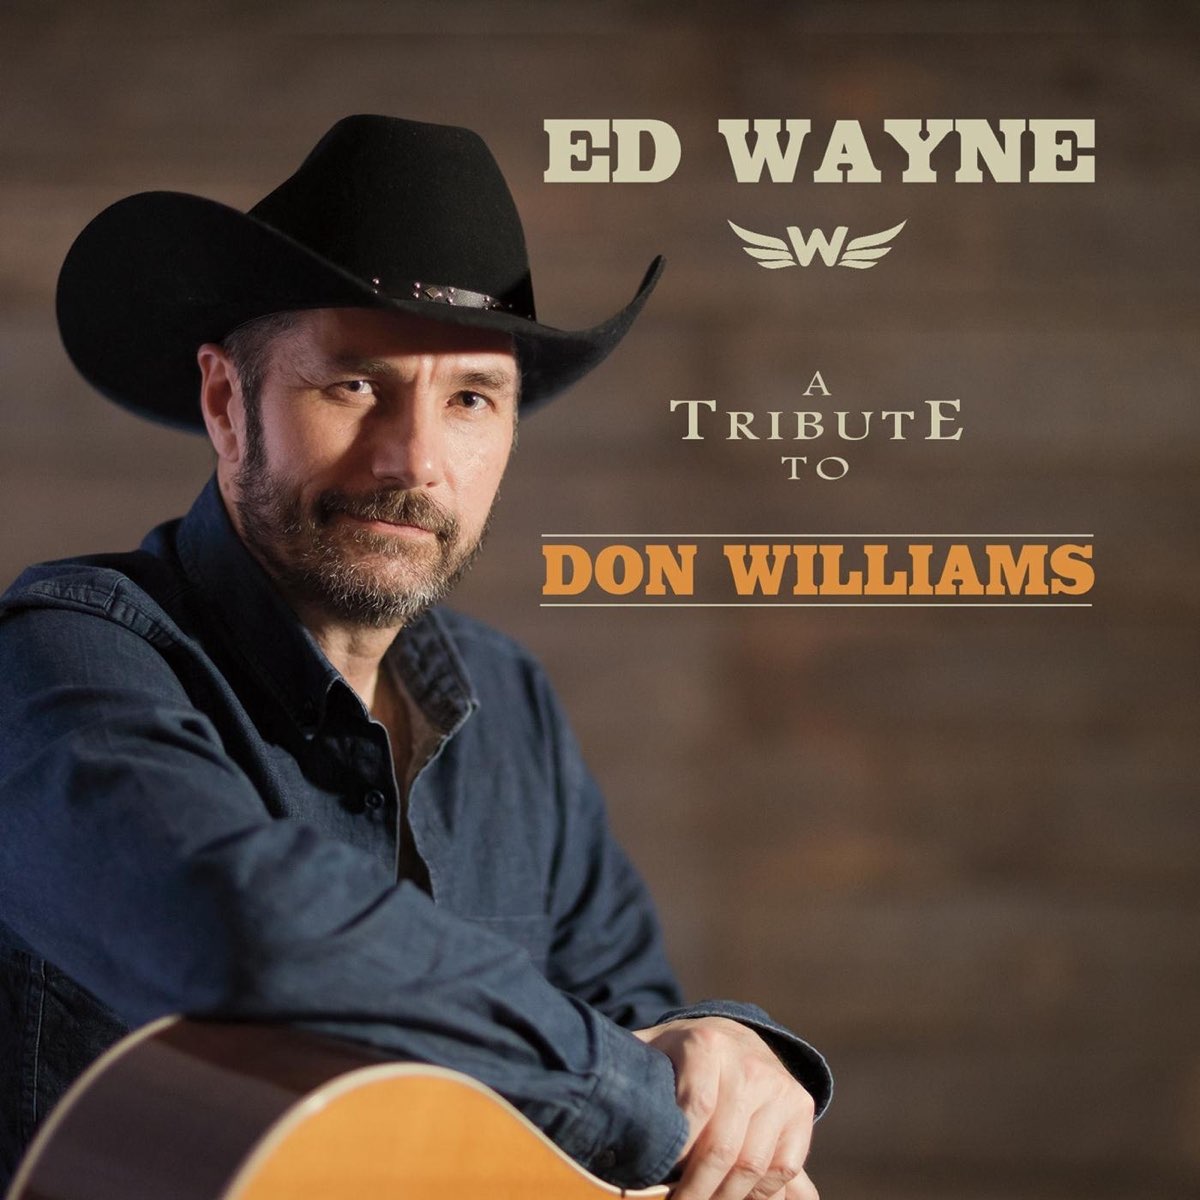 ‎A Tribute to Don Williams by Ed Wayne on Apple Music